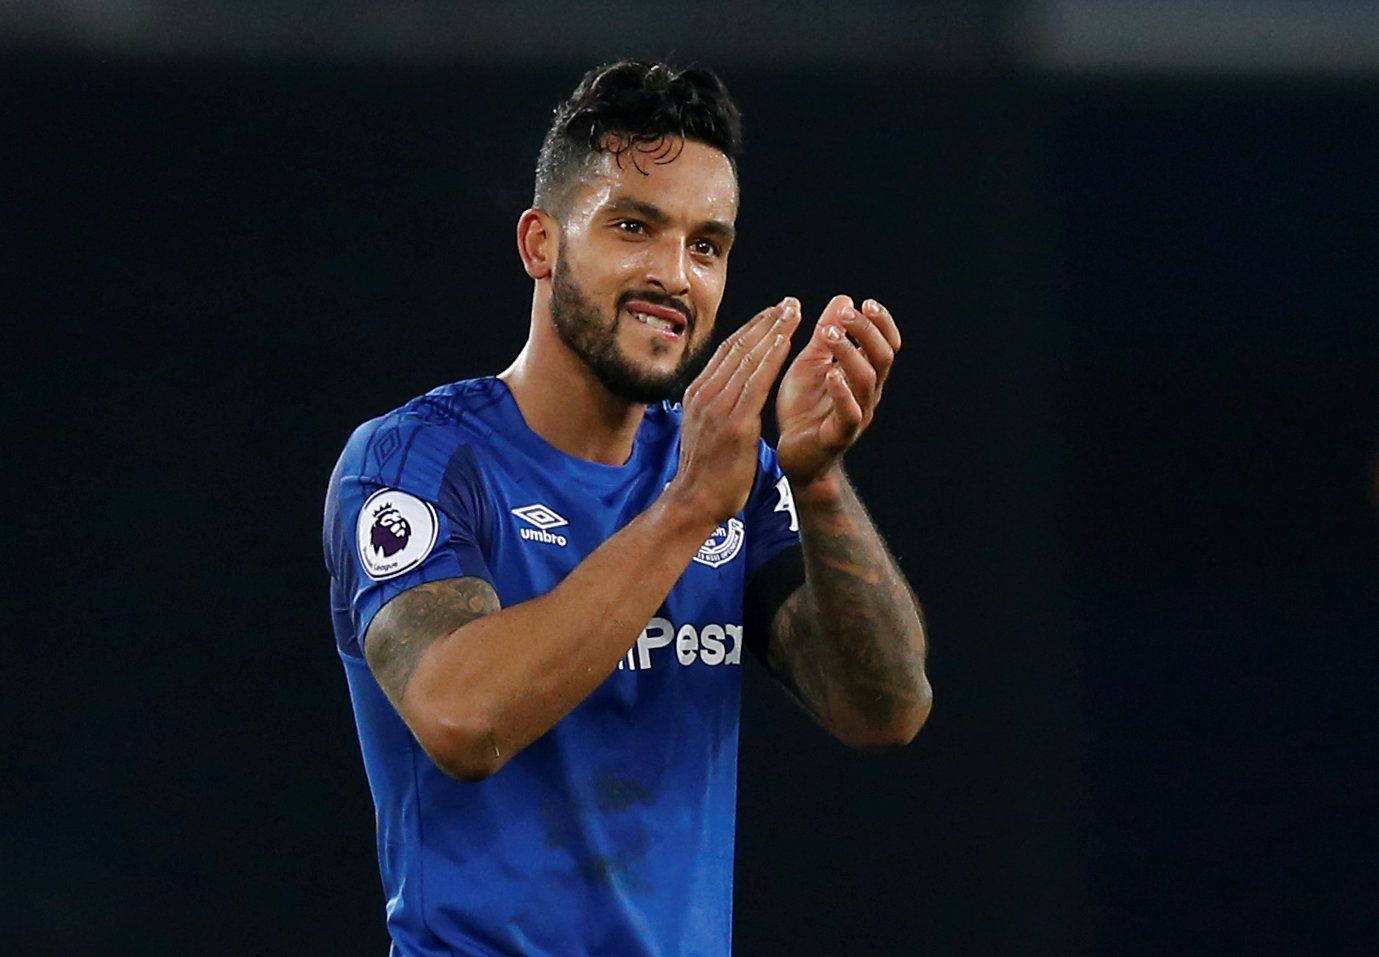 Soccer Football - Premier League - Everton vs West Bromwich Albion - Goodison Park, Liverpool, Britain - January 20, 2018   Everton's Theo Walcott applauds the fans after the match    REUTERS/Andrew Yates    EDITORIAL USE ONLY. No use with unauthorized audio, video, data, fixture lists, club/league logos or 